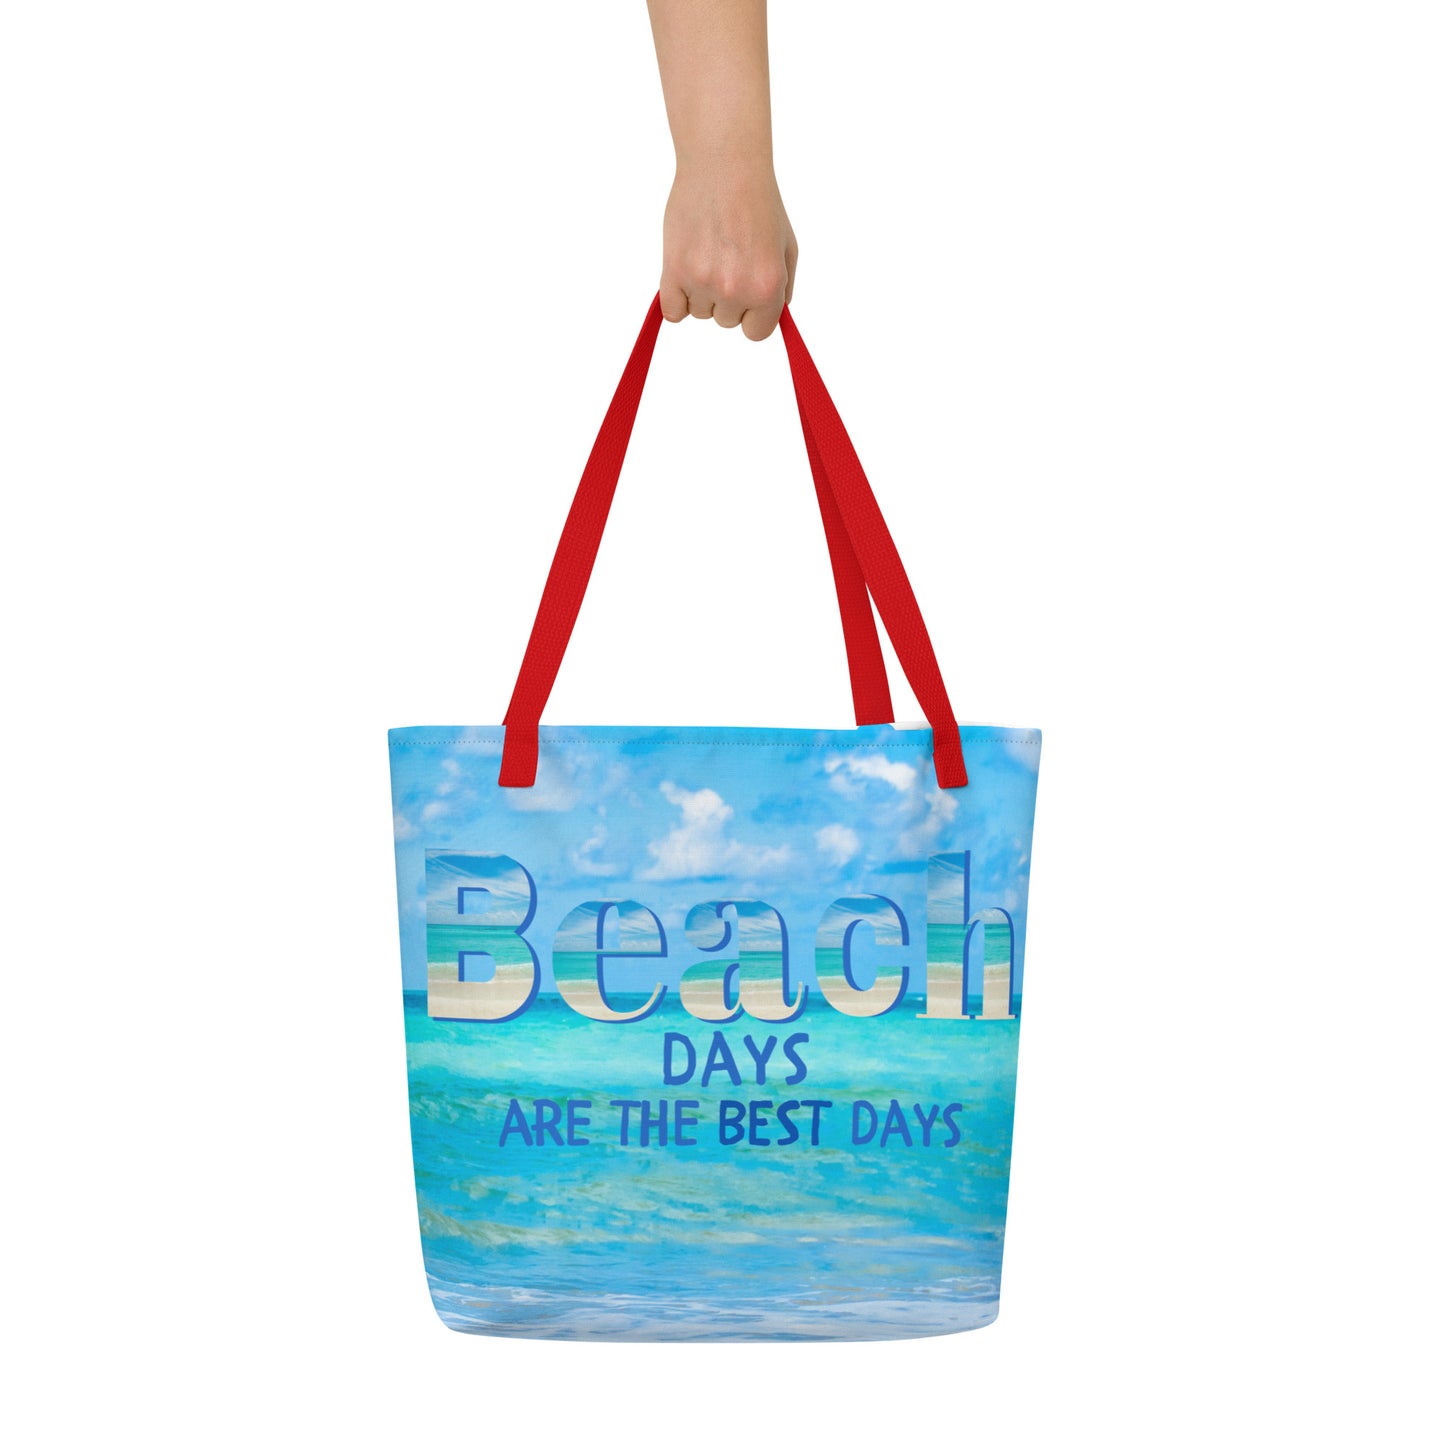 All-Over Print Large Tote Bag with Pocket - Beach Days are the Best Days